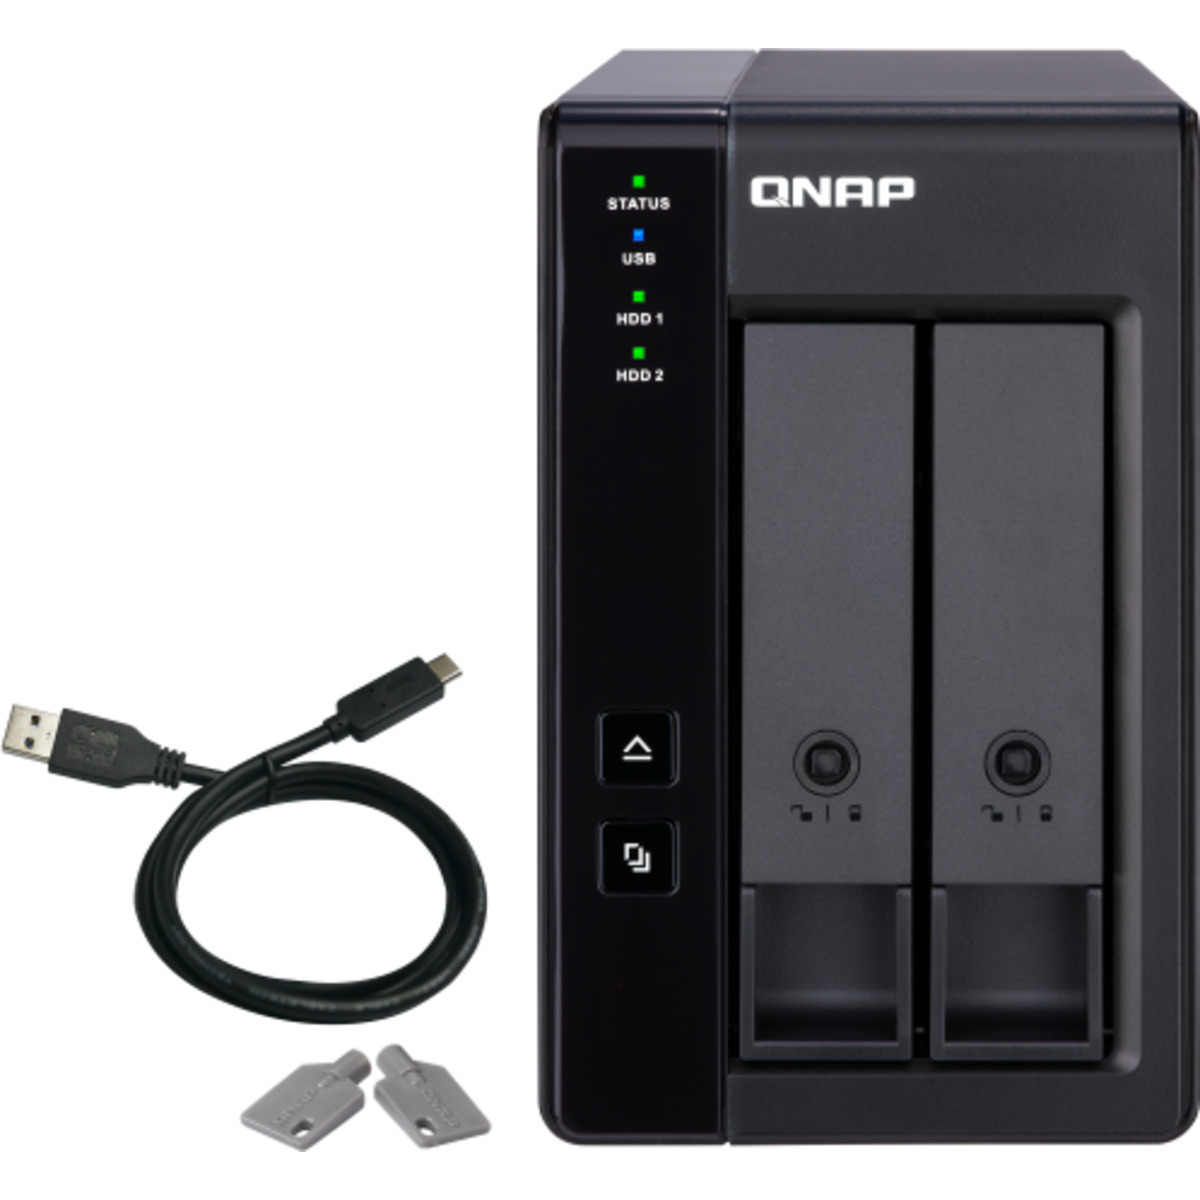 QNAP TR-002 External Expansion Drive 10tb 2-Bay Desktop Multimedia / Power User / Business Expansion Enclosure 1x10tb Seagate IronWolf Pro ST10000NT001 3.5 7200rpm SATA 6Gb/s HDD NAS Class Drives Installed - Burn-In Tested - ON SALE TR-002 External Expansion Drive